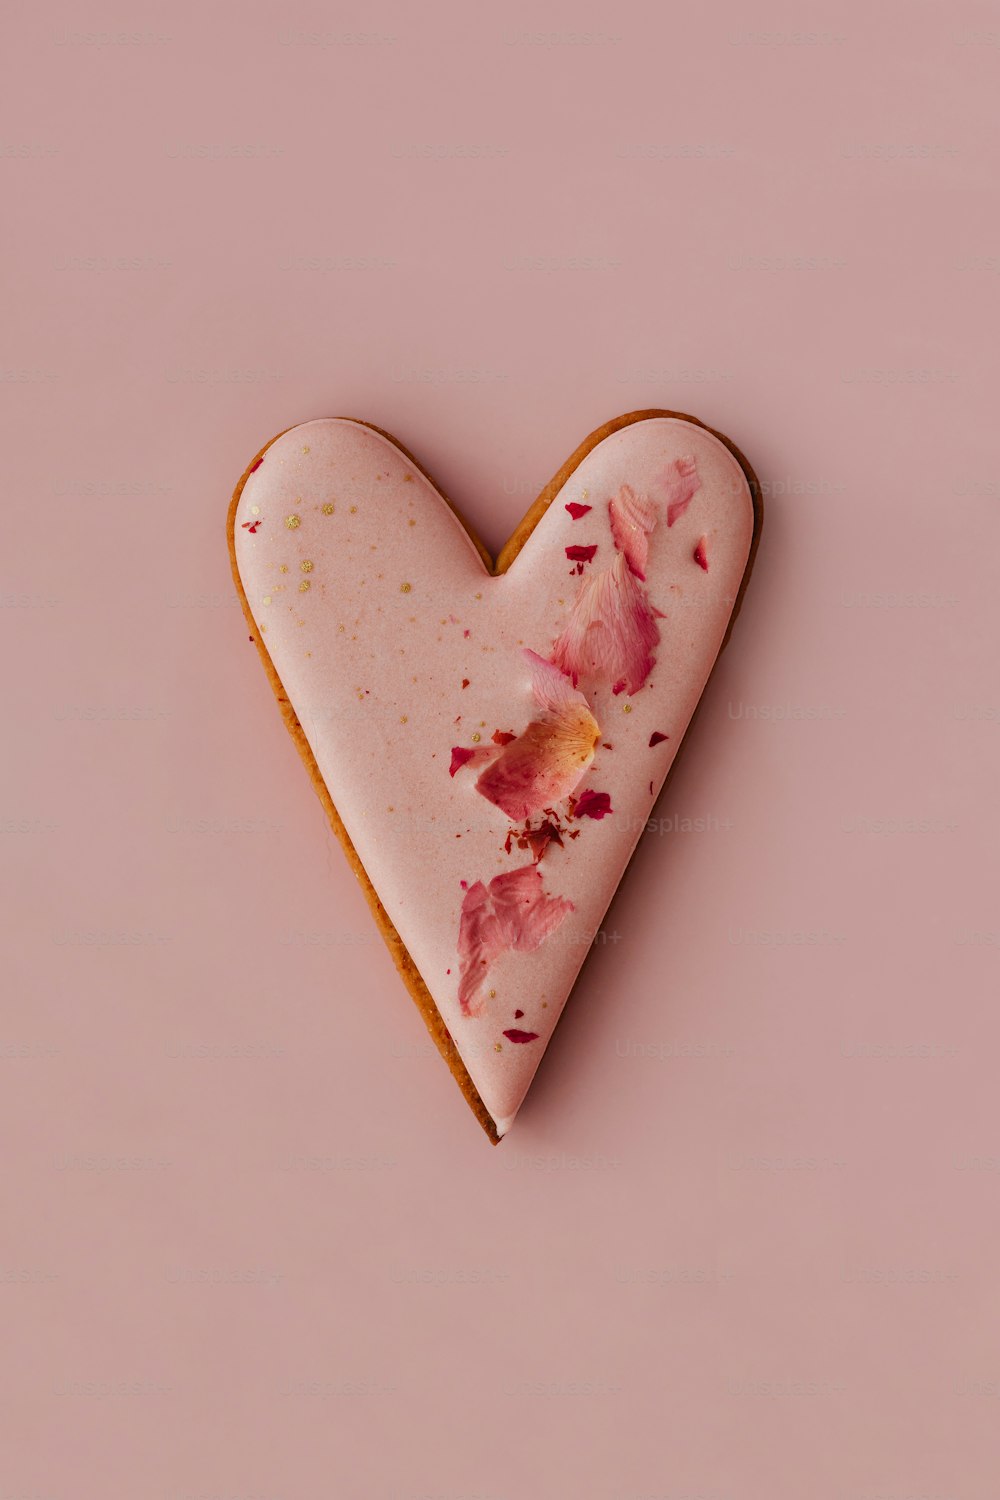 a heart shaped cookie with pink flowers on it